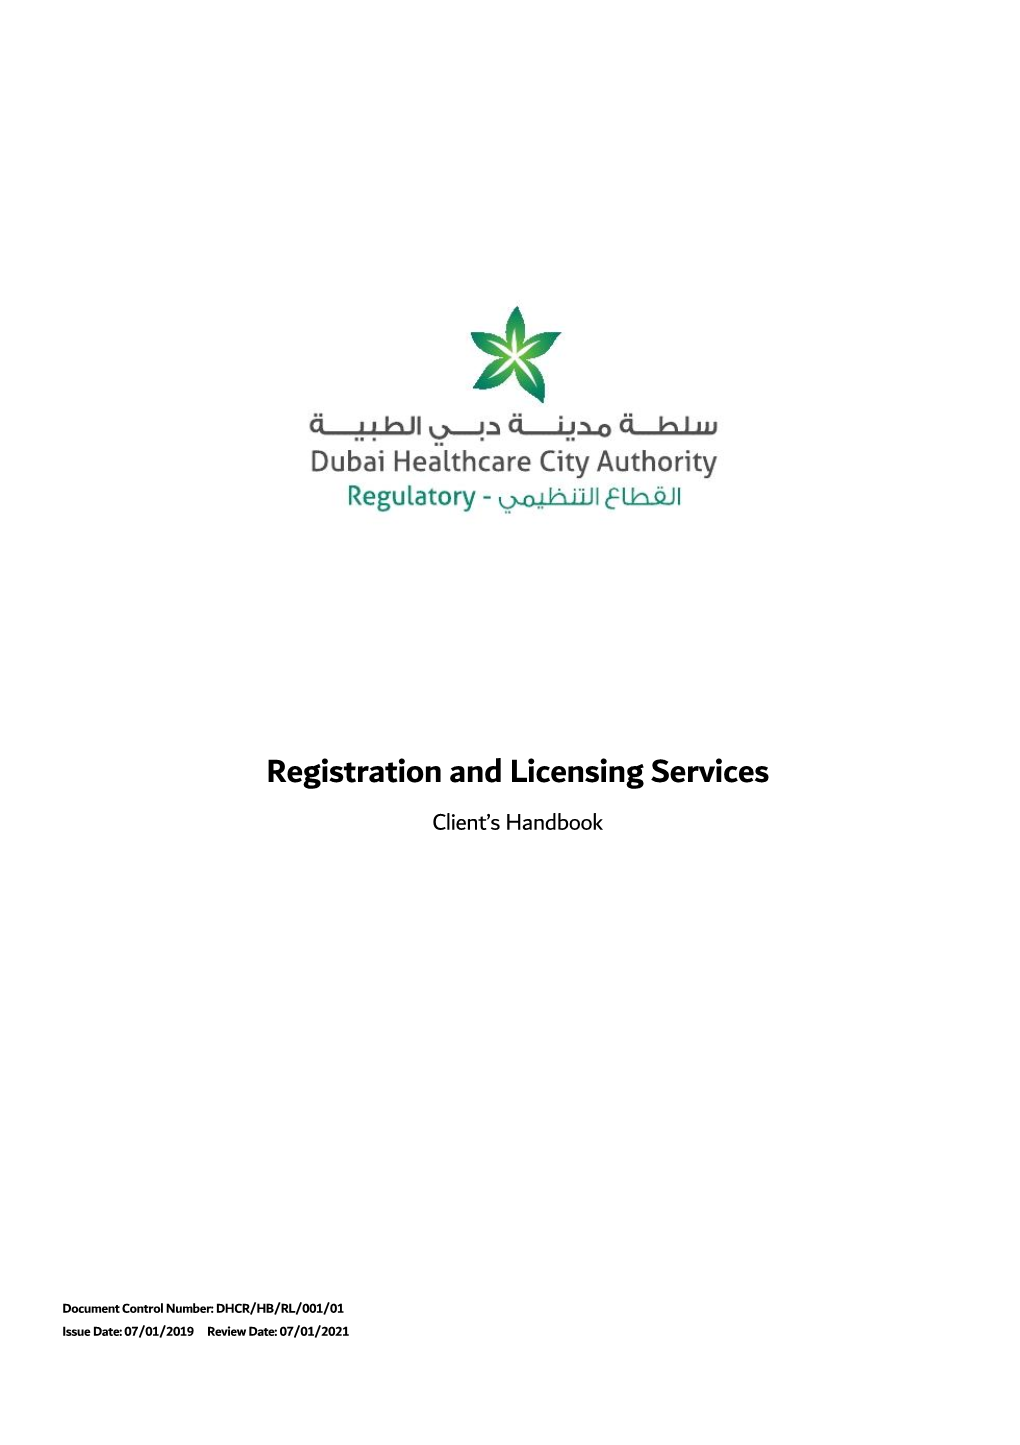 Registration and Licensing Services